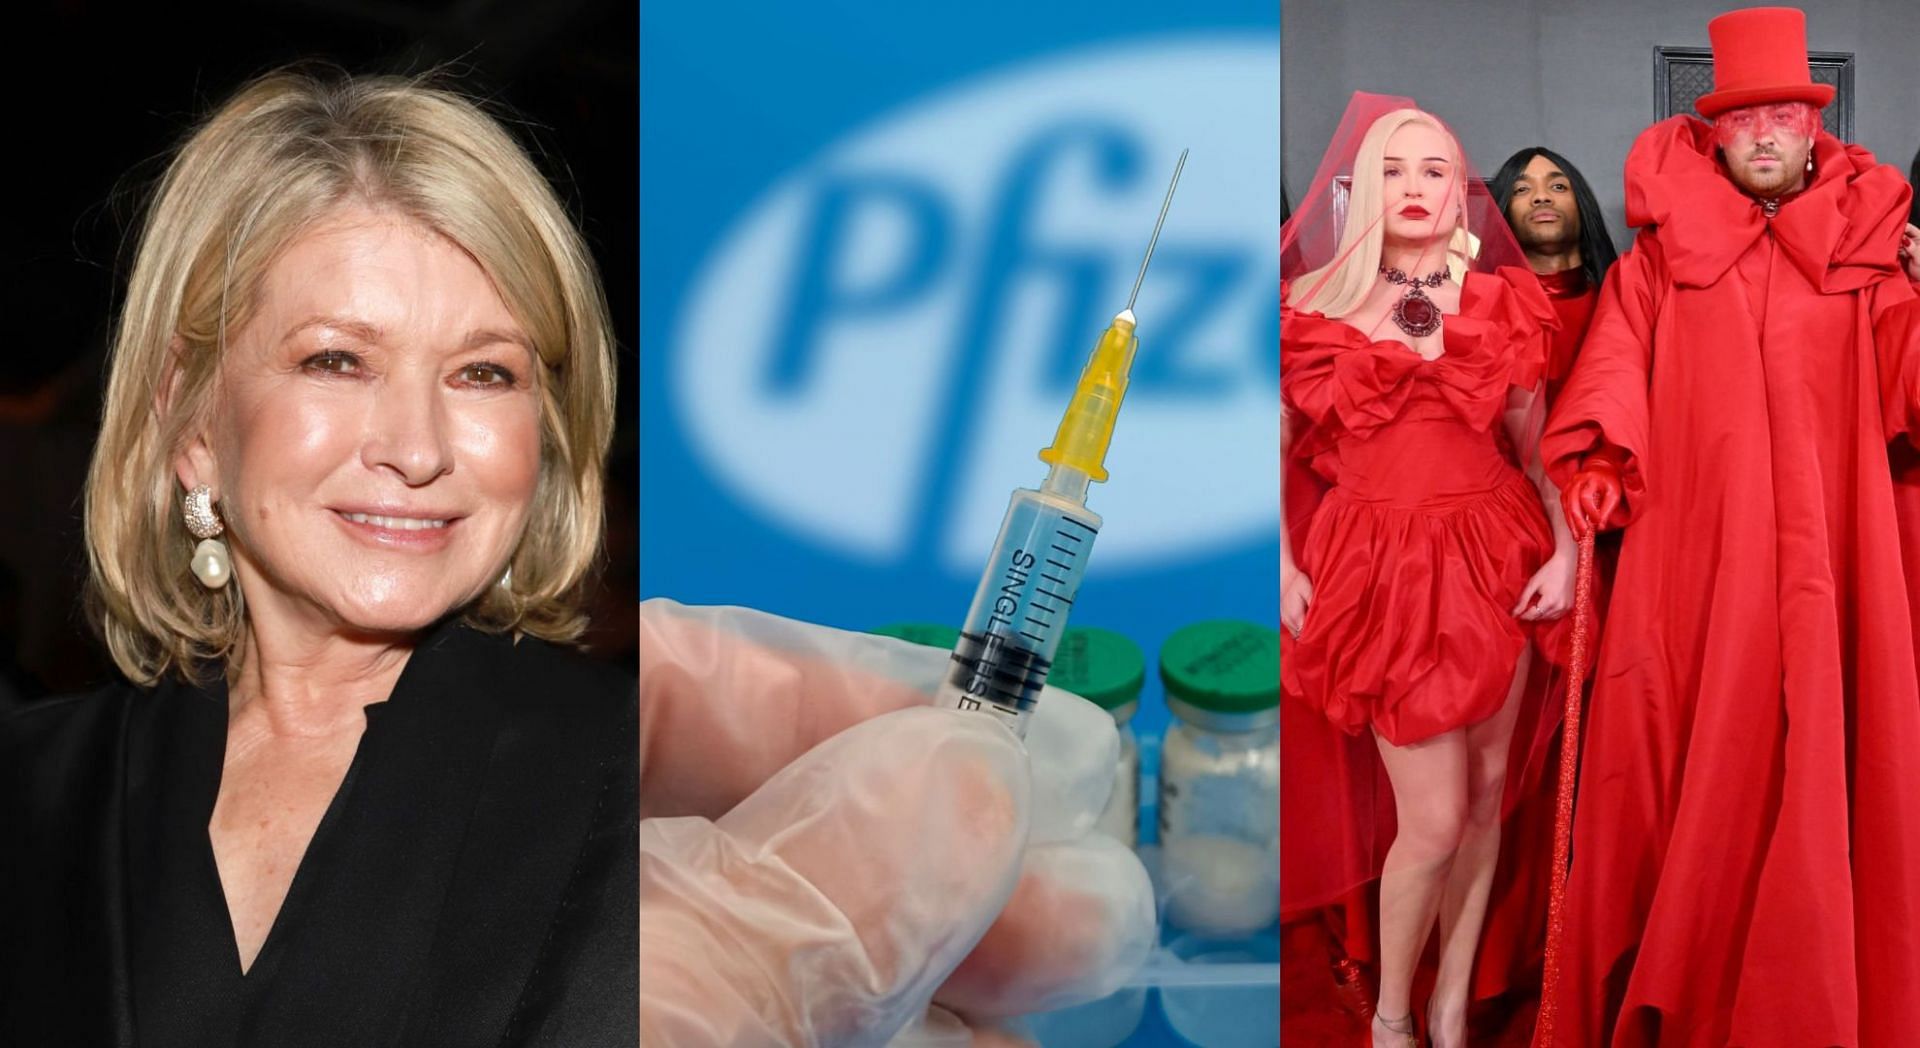 Pfizer came under scrutiny amid Martha Stewart ad and Sam Smith Grammy performance controversy (Image via Getty Images)